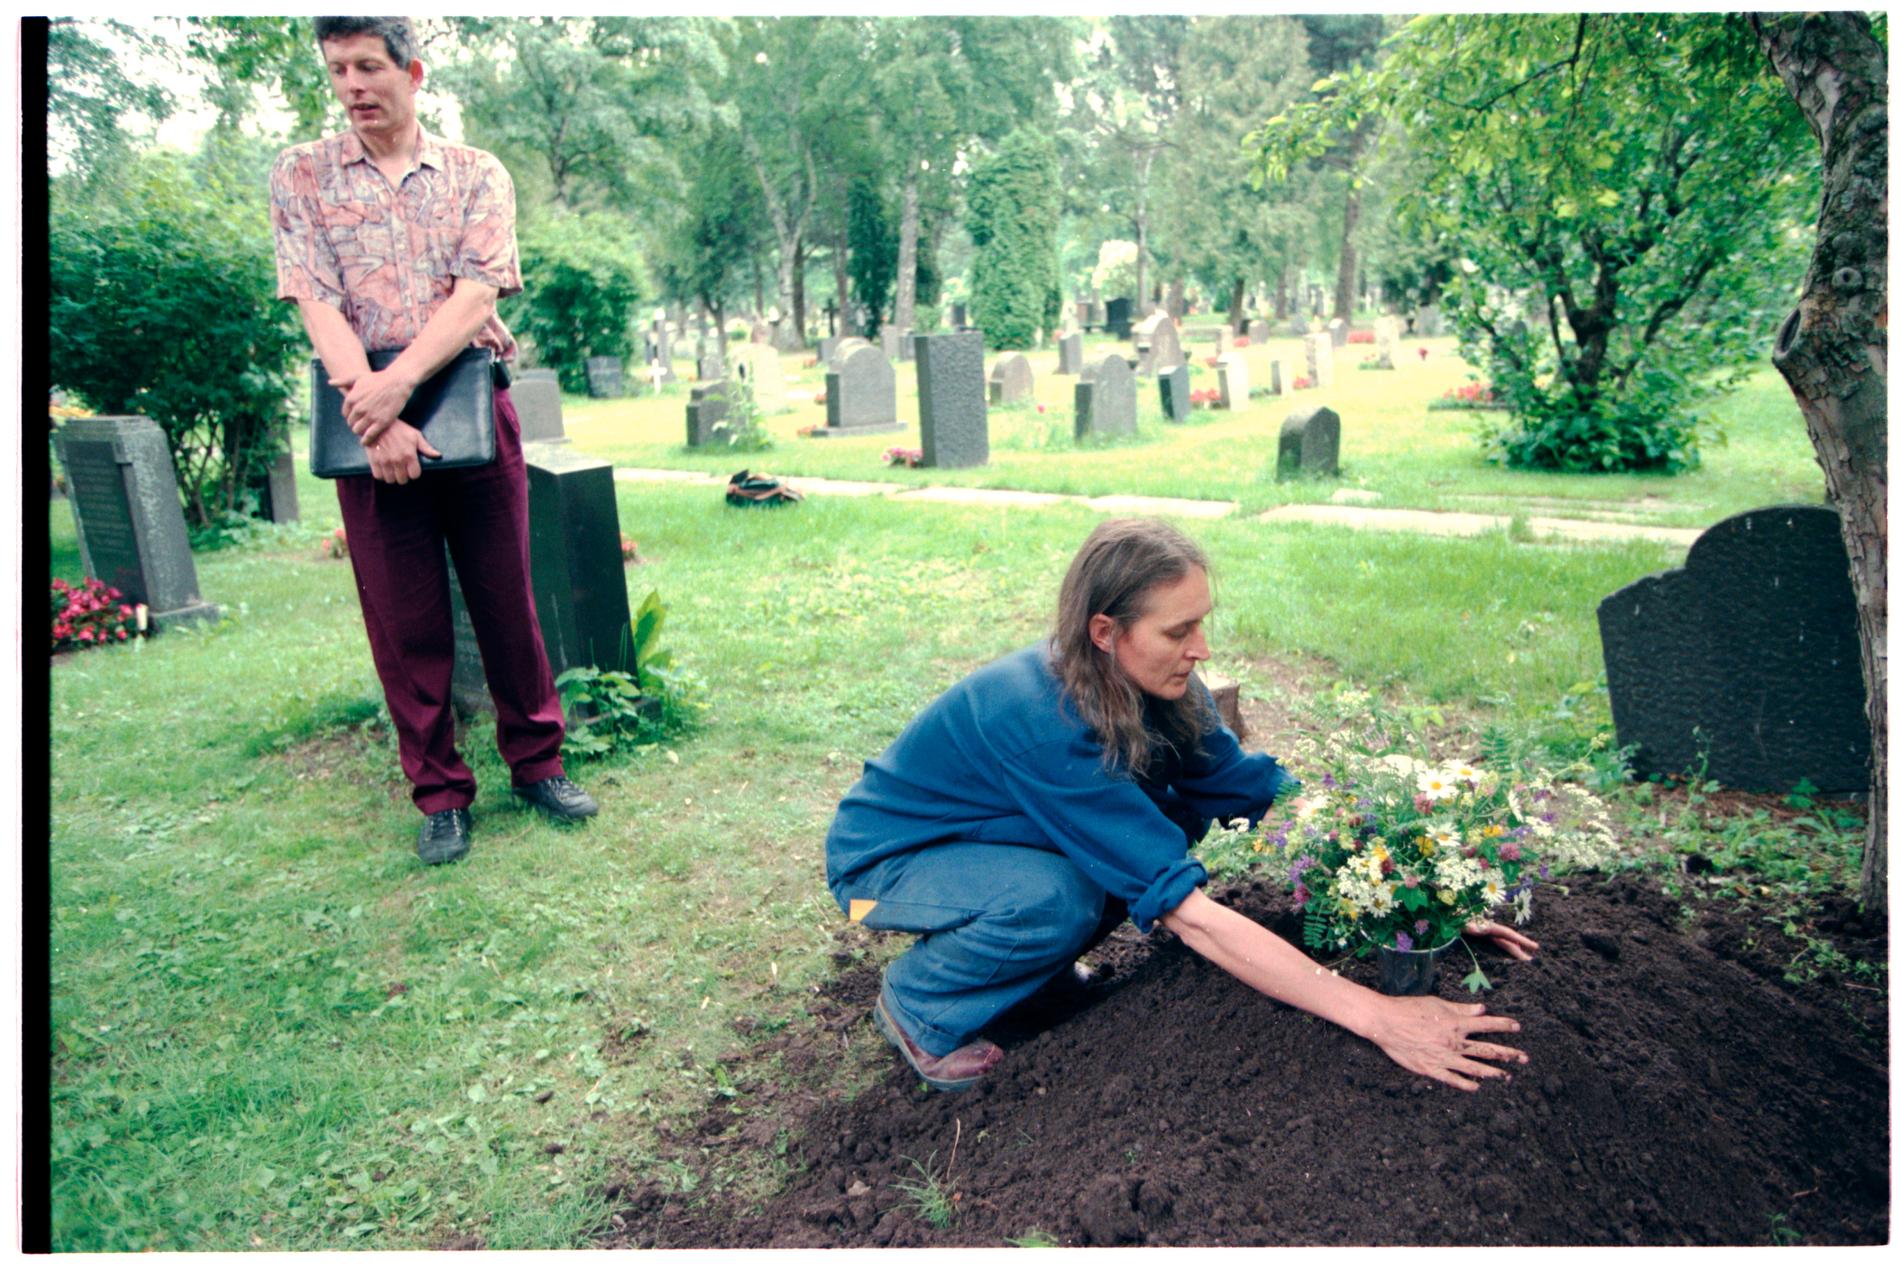 1996: Investigator Tom Storm Olsen followed the Plaza woman to the grave. Brit Gulbjørnrud, who worked at the cemetery, thought it was sad to see the empty grave and picked some wildflowers. Photo: ESPEN EGIL HANSEN, VG.